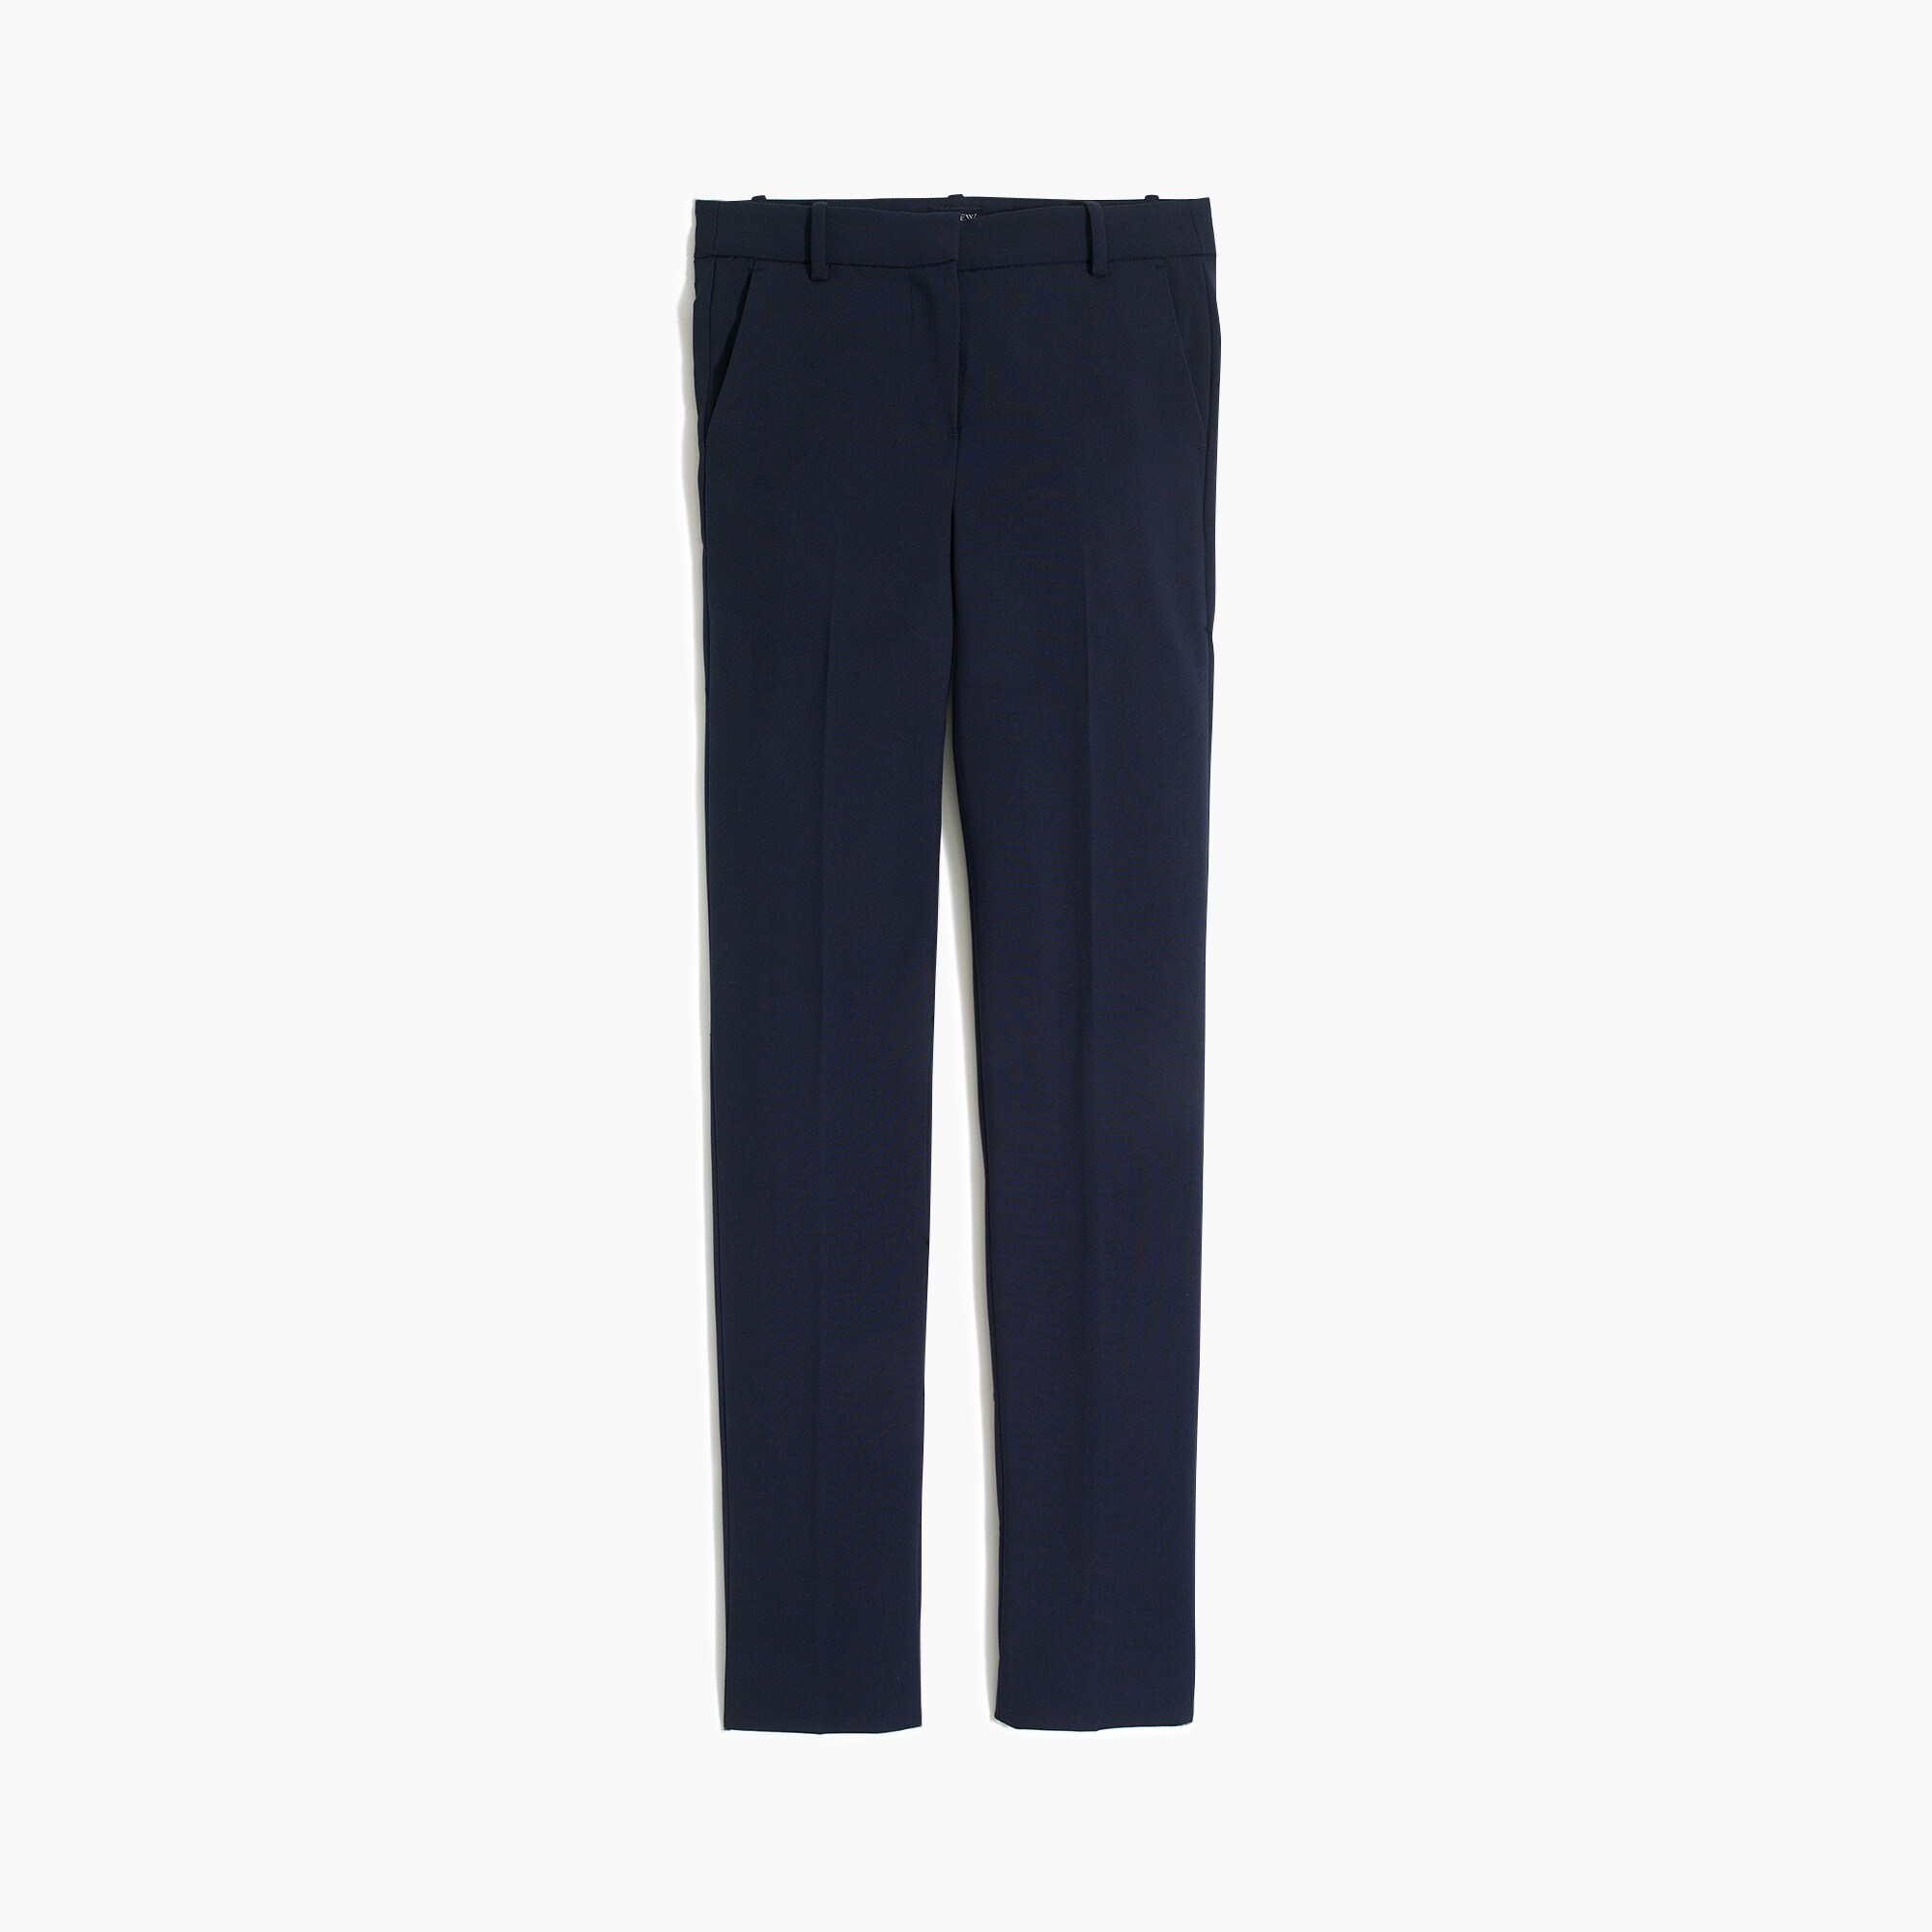  Full-length Ruby pant in stretch twill